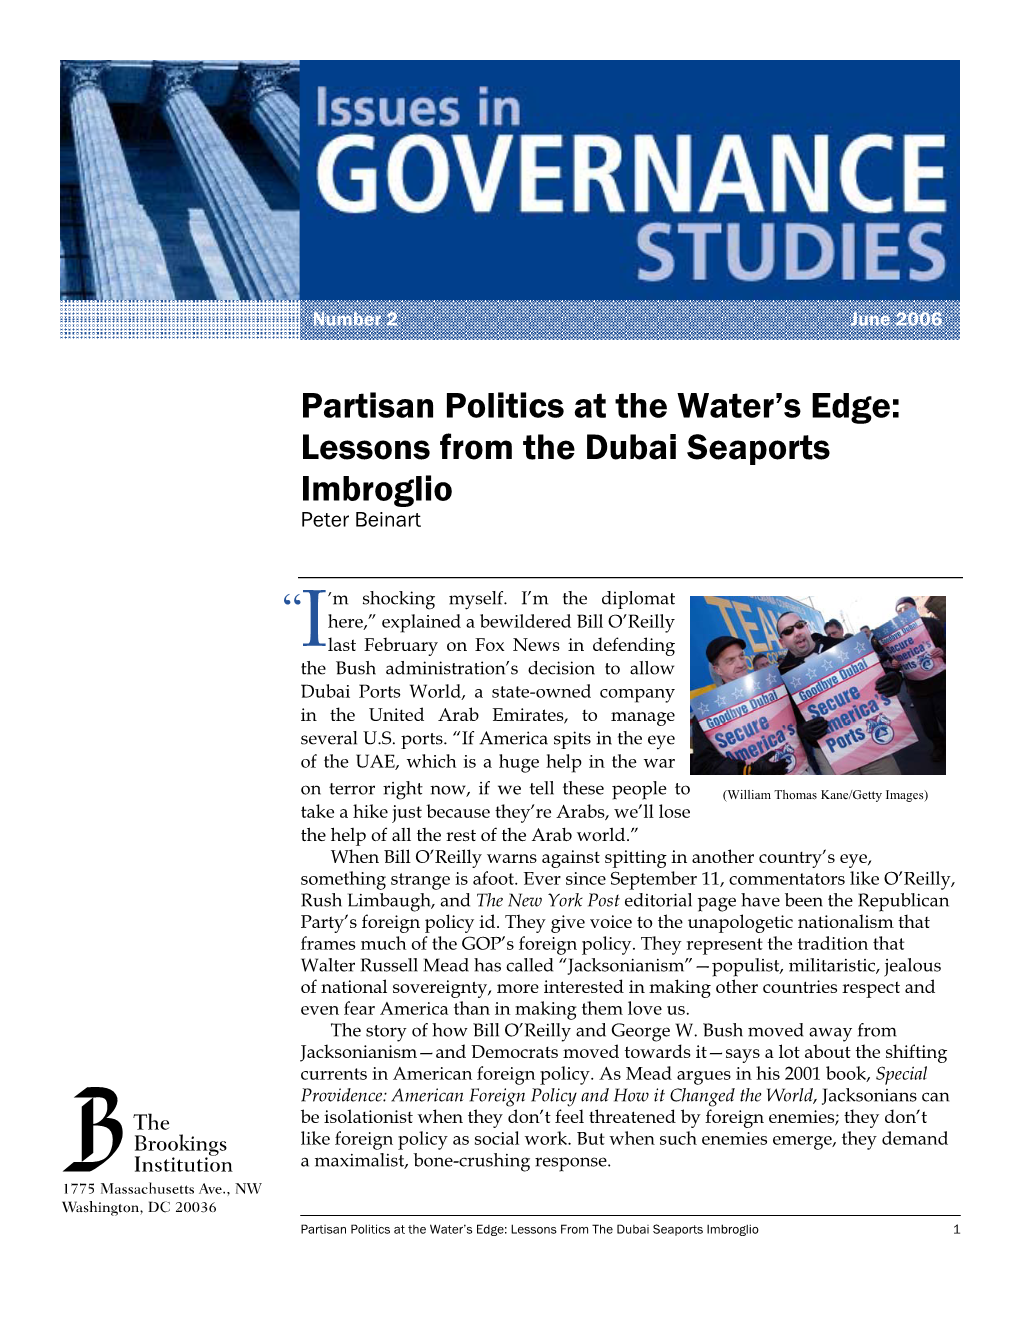 Partisan Politics at the Water's Edge: Lessons from the Dubai Seaports